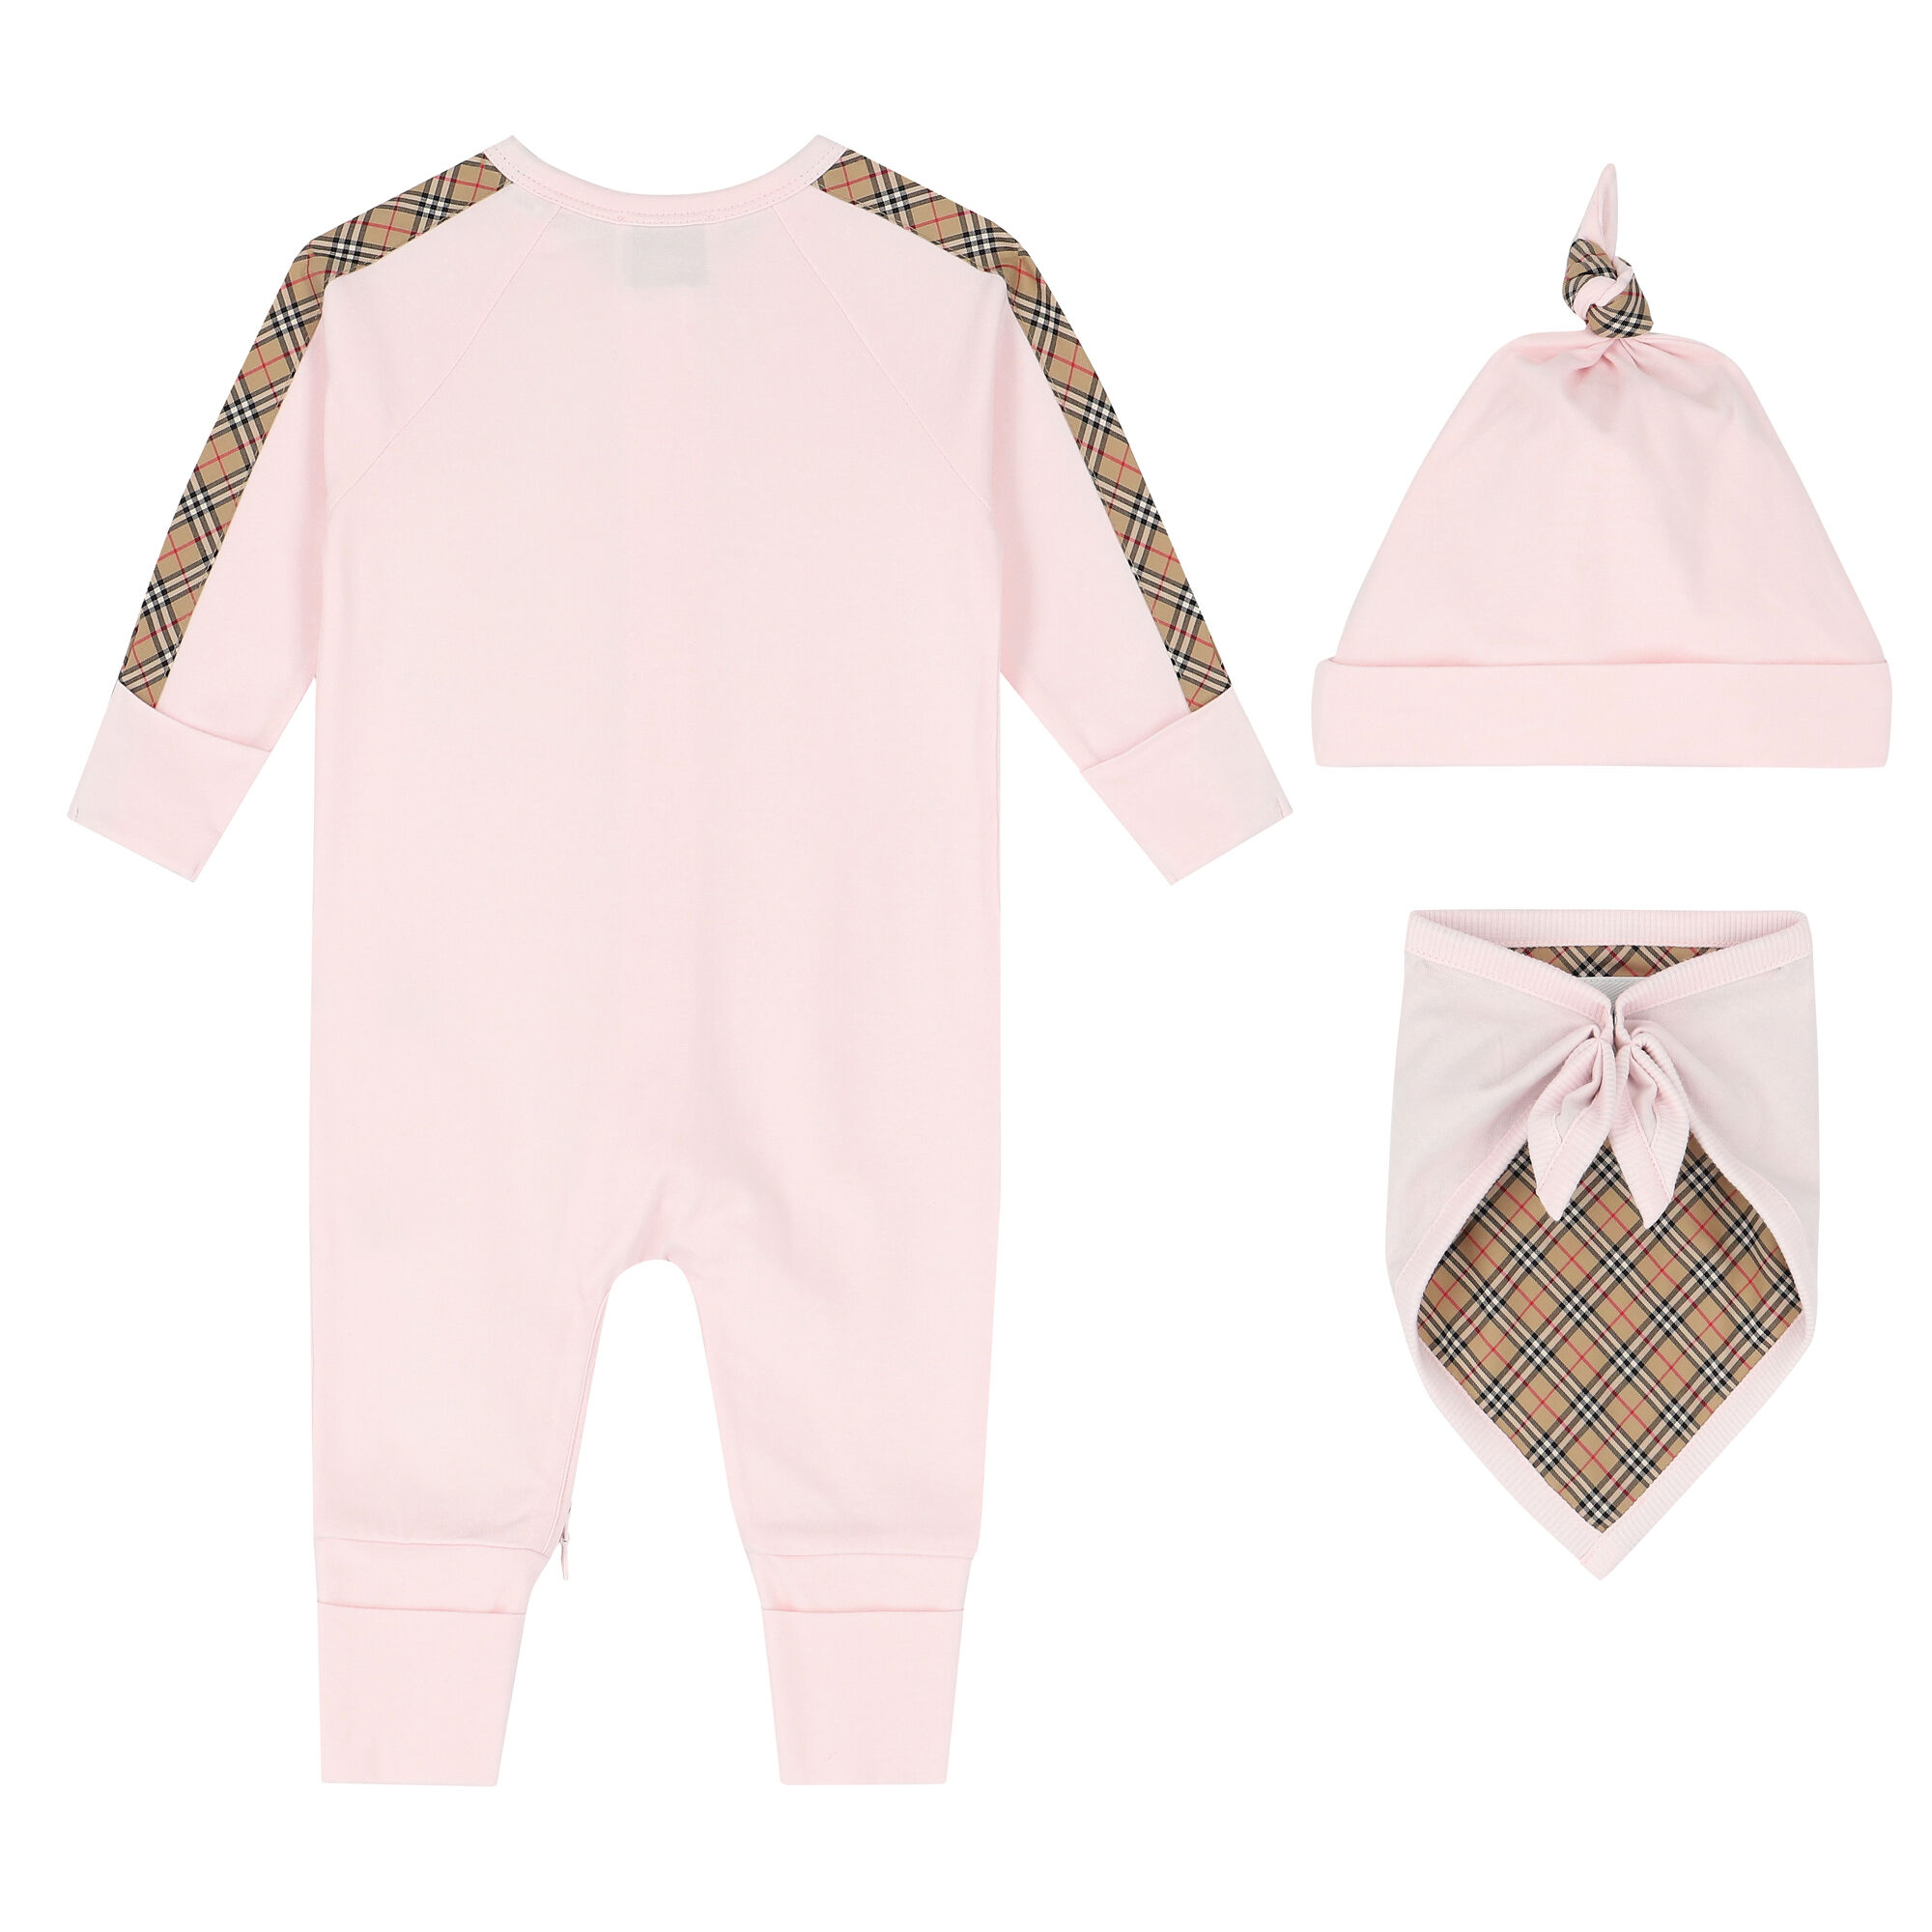 Burberry Baby Girls Pink & Beige Romper Gift Set | Junior Couture USA